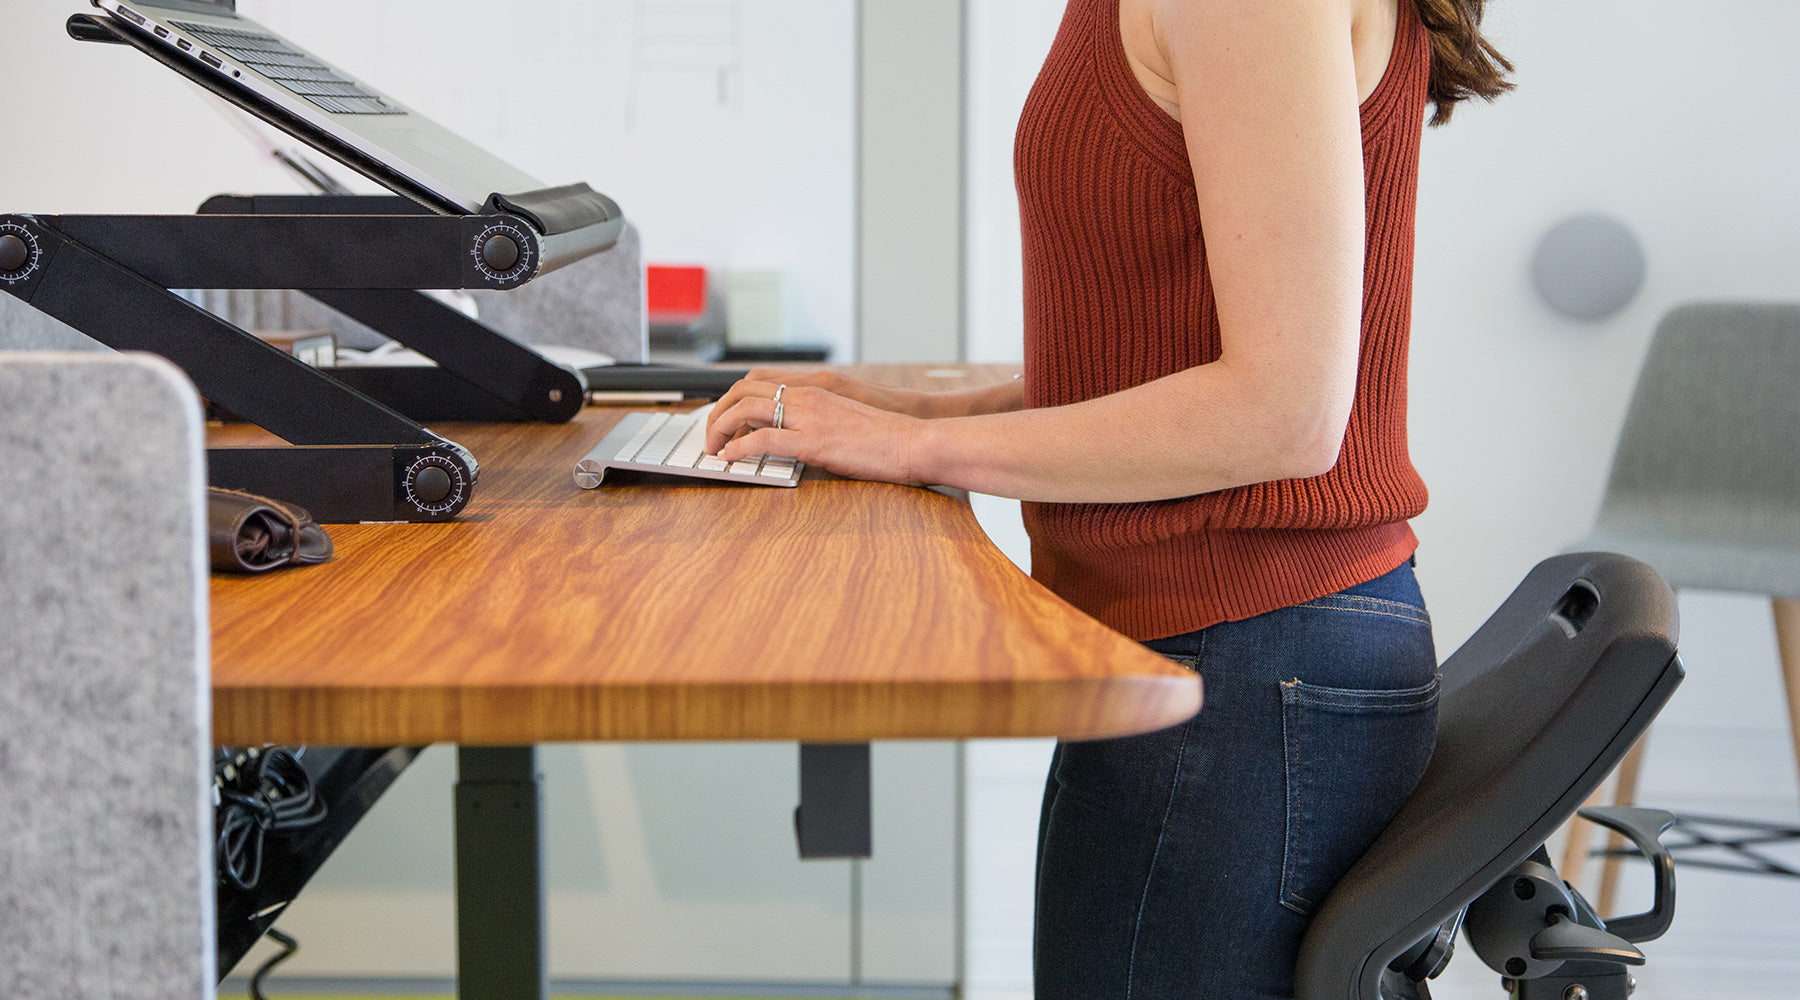 L Standing Desk Chair with Adjustable Height and Anti-Fatigue Mat